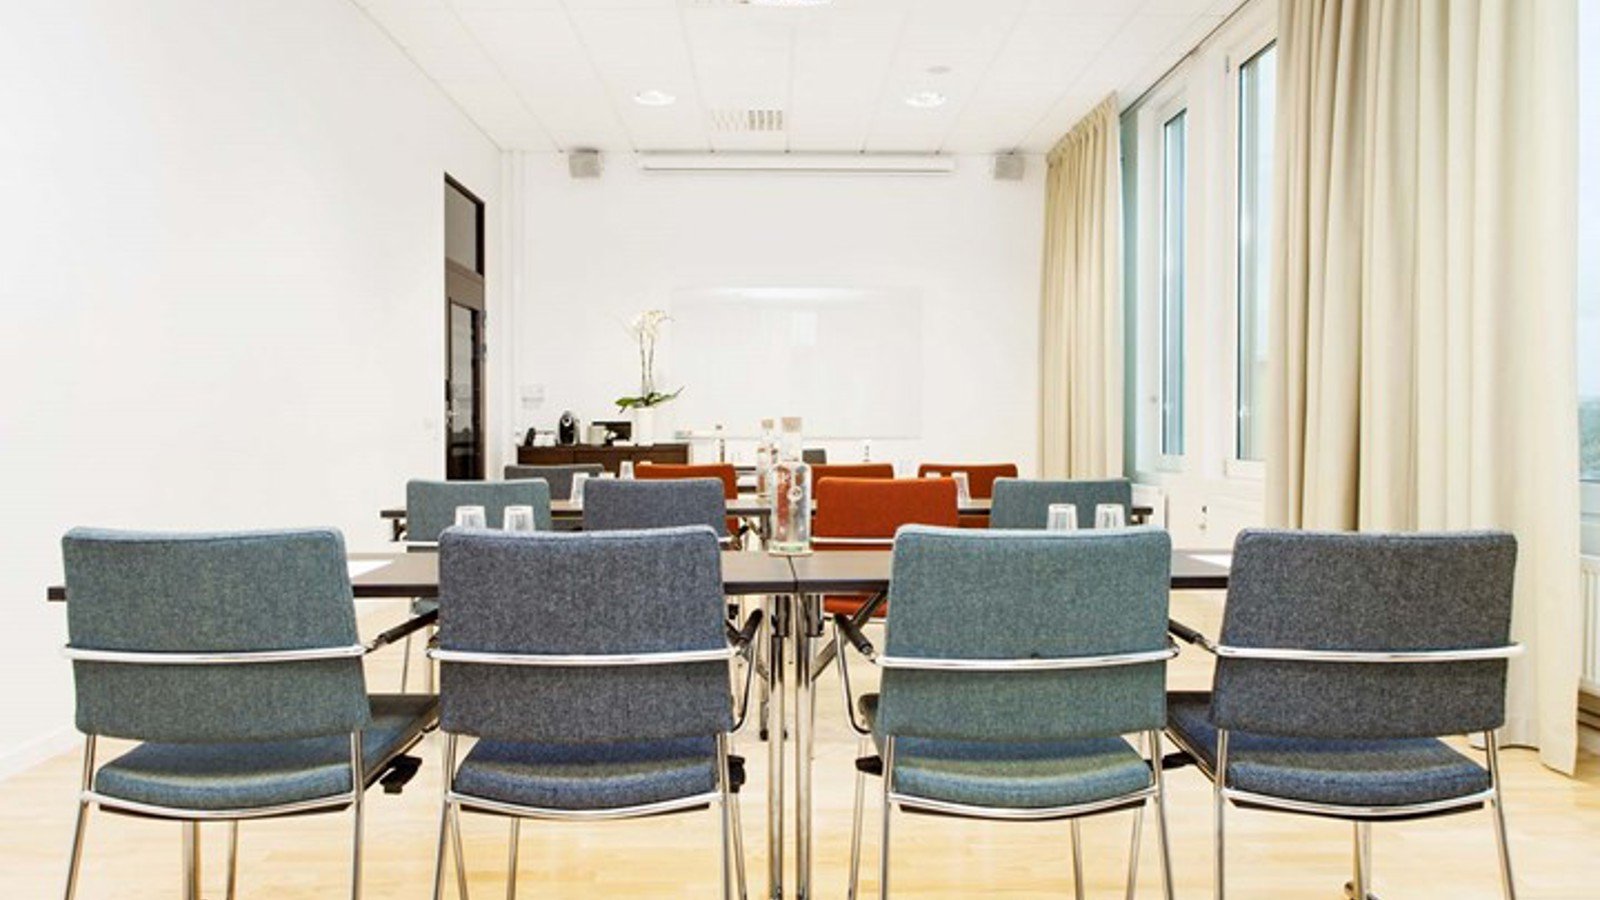 Conference room with lined up gray chairs and white walls